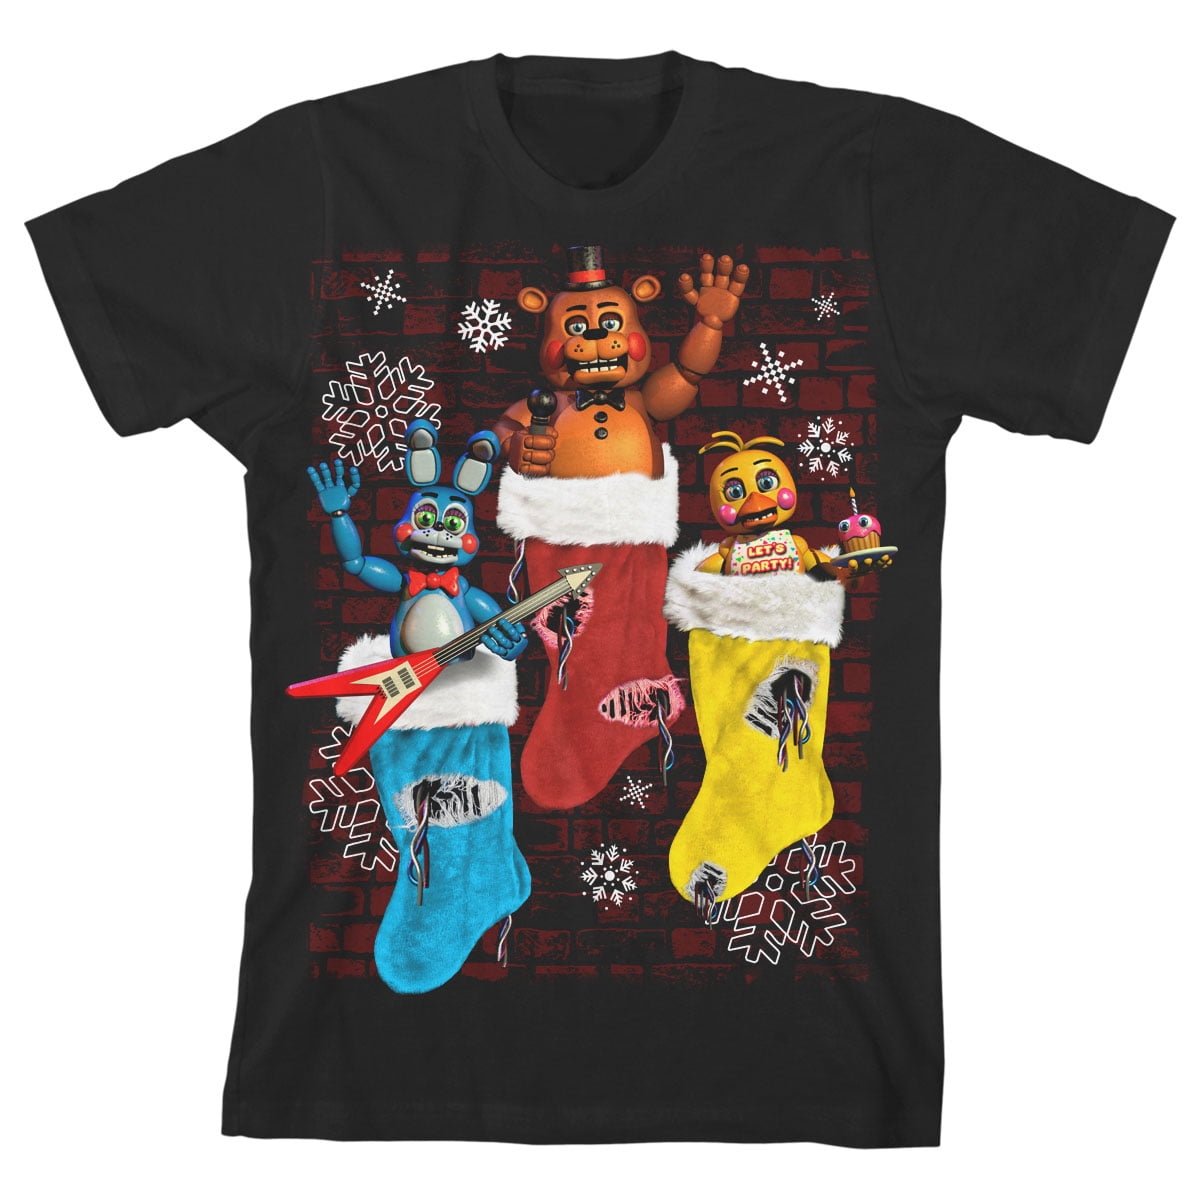 FNAF Snow Chica Five Night's at Freddy's 5 Holiday christmas